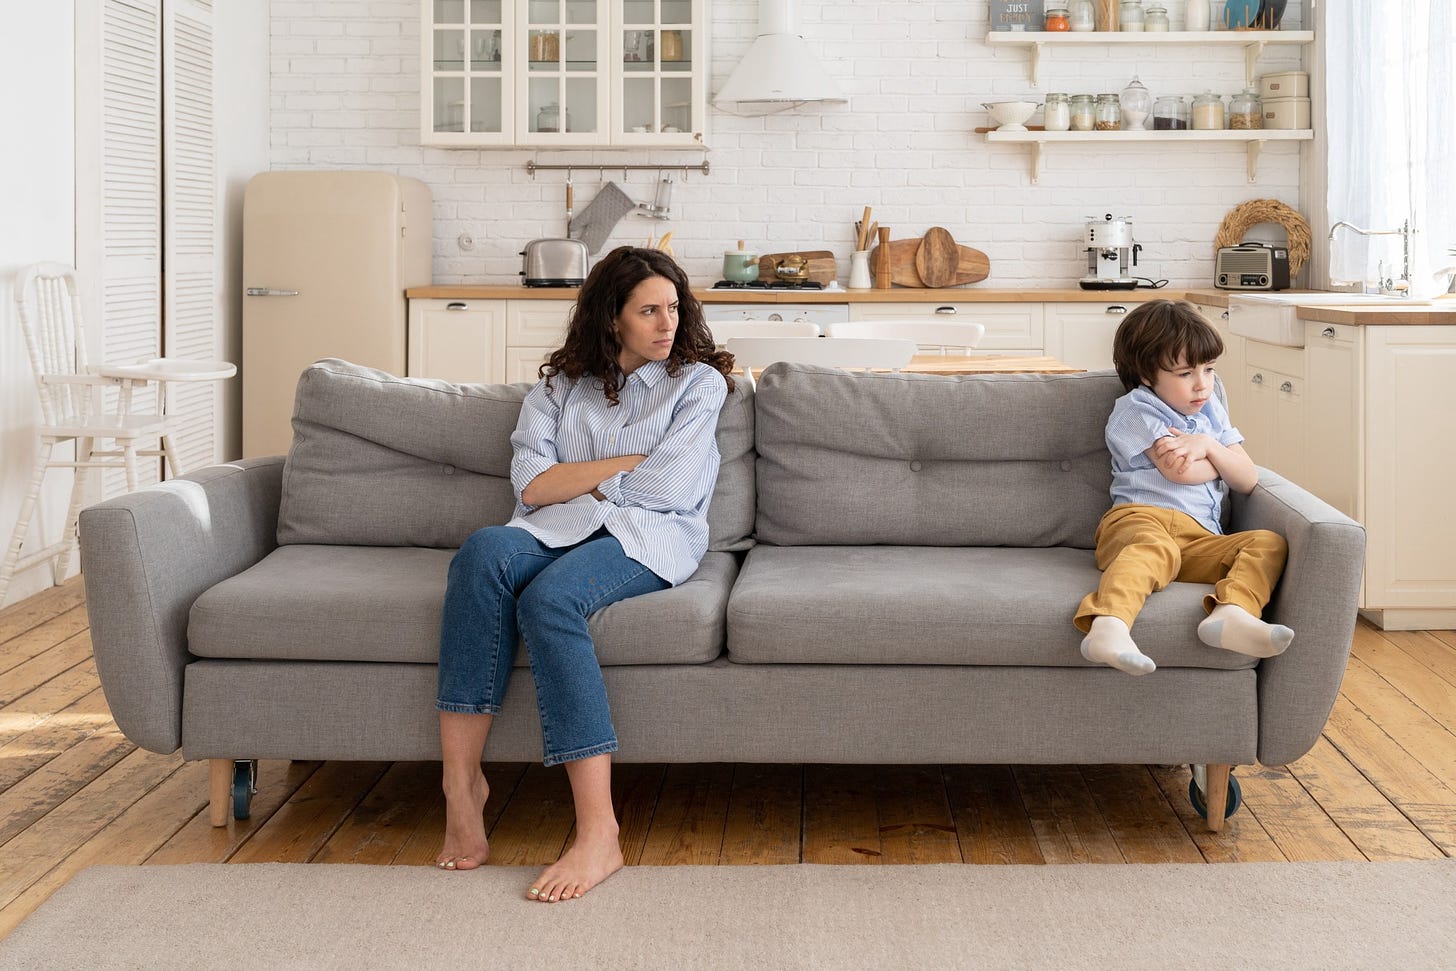 A mother glares at her child as they sit with their arms crossed on opposite ends of the couch.